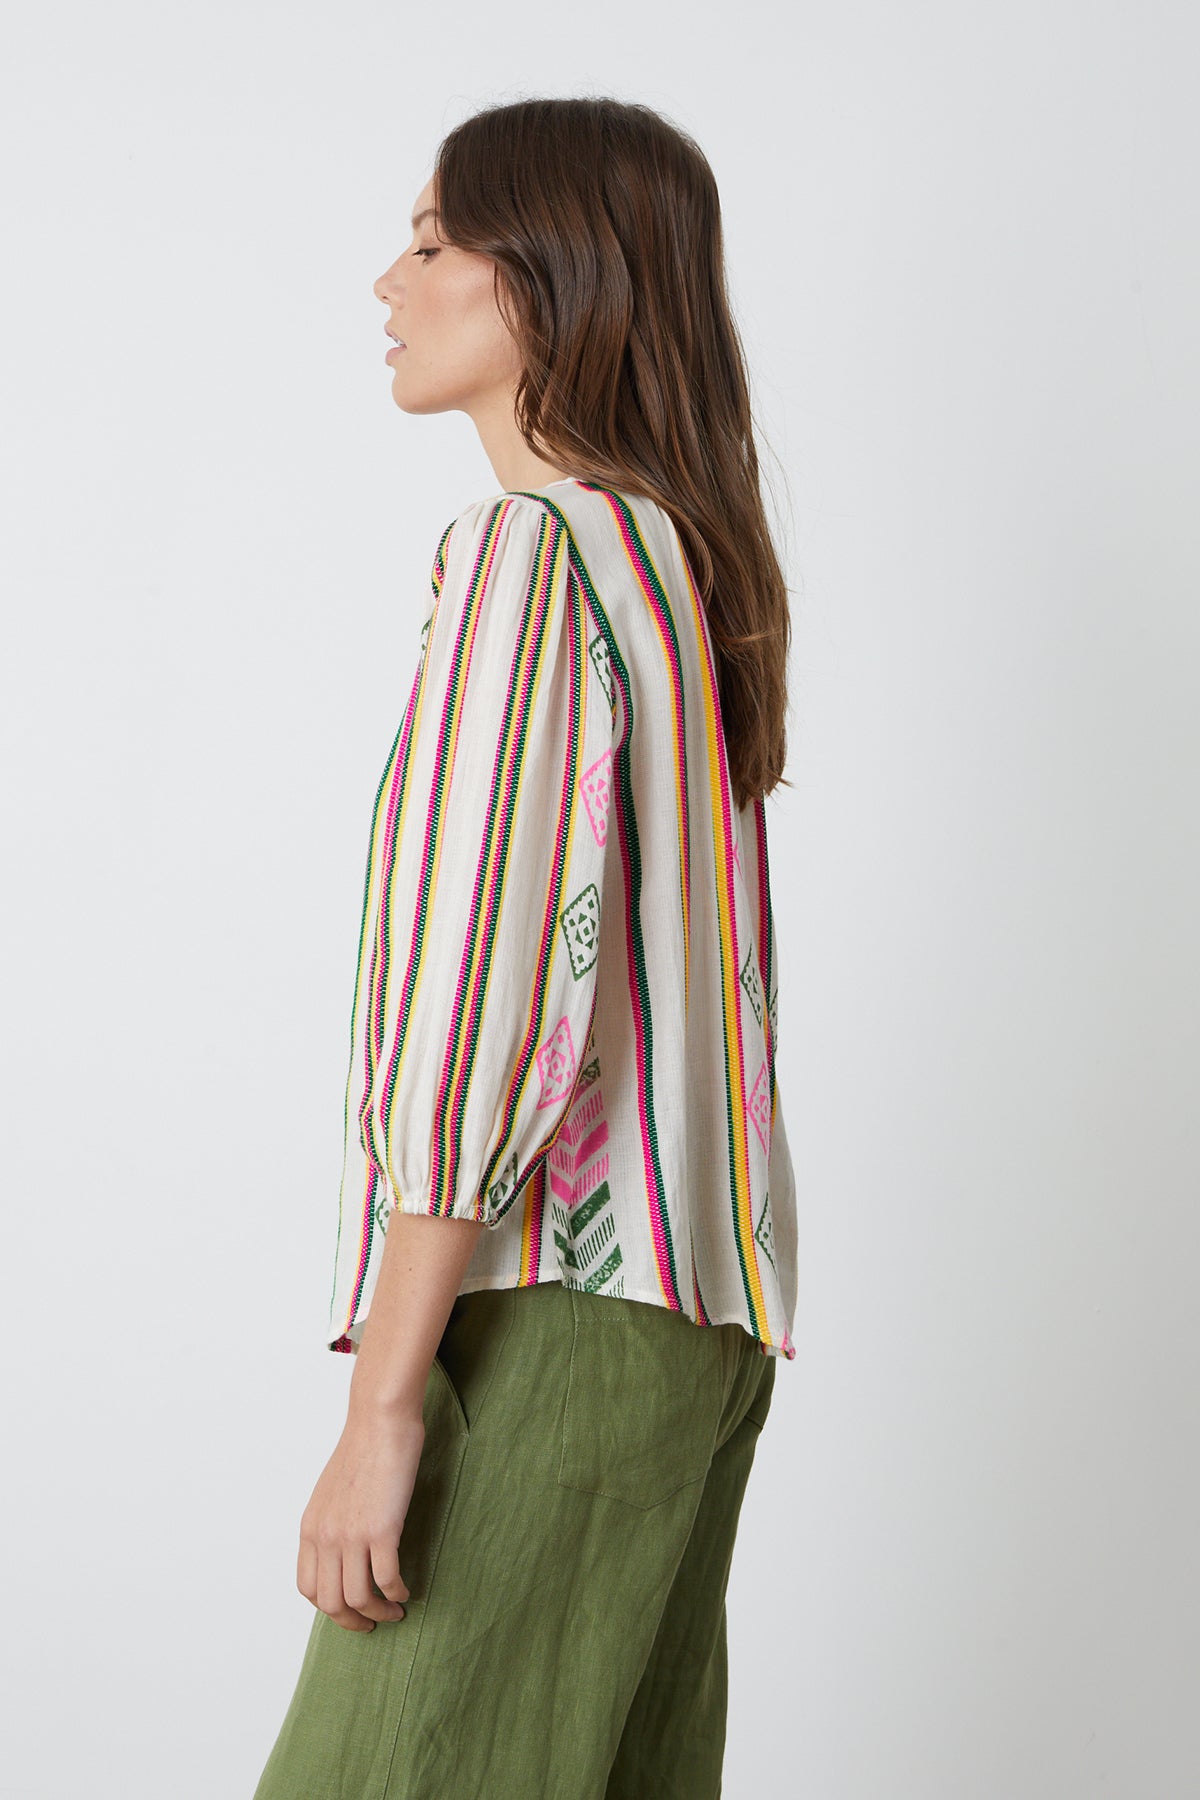   Beth Boho Top in multi colored jacquard print with Dru pant in basil green side 